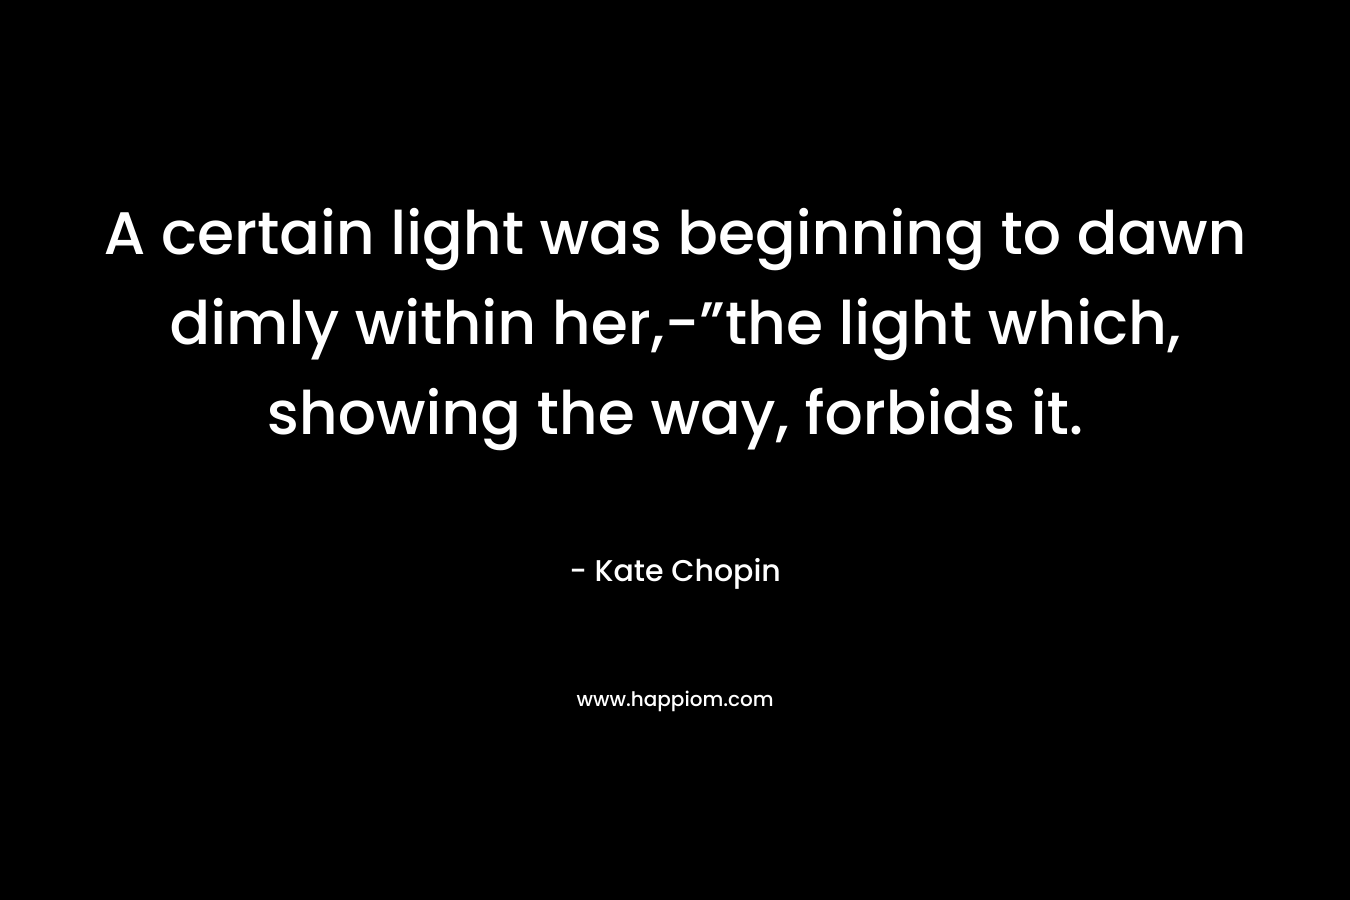 A certain light was beginning to dawn dimly within her,-”the light which, showing the way, forbids it. – Kate Chopin